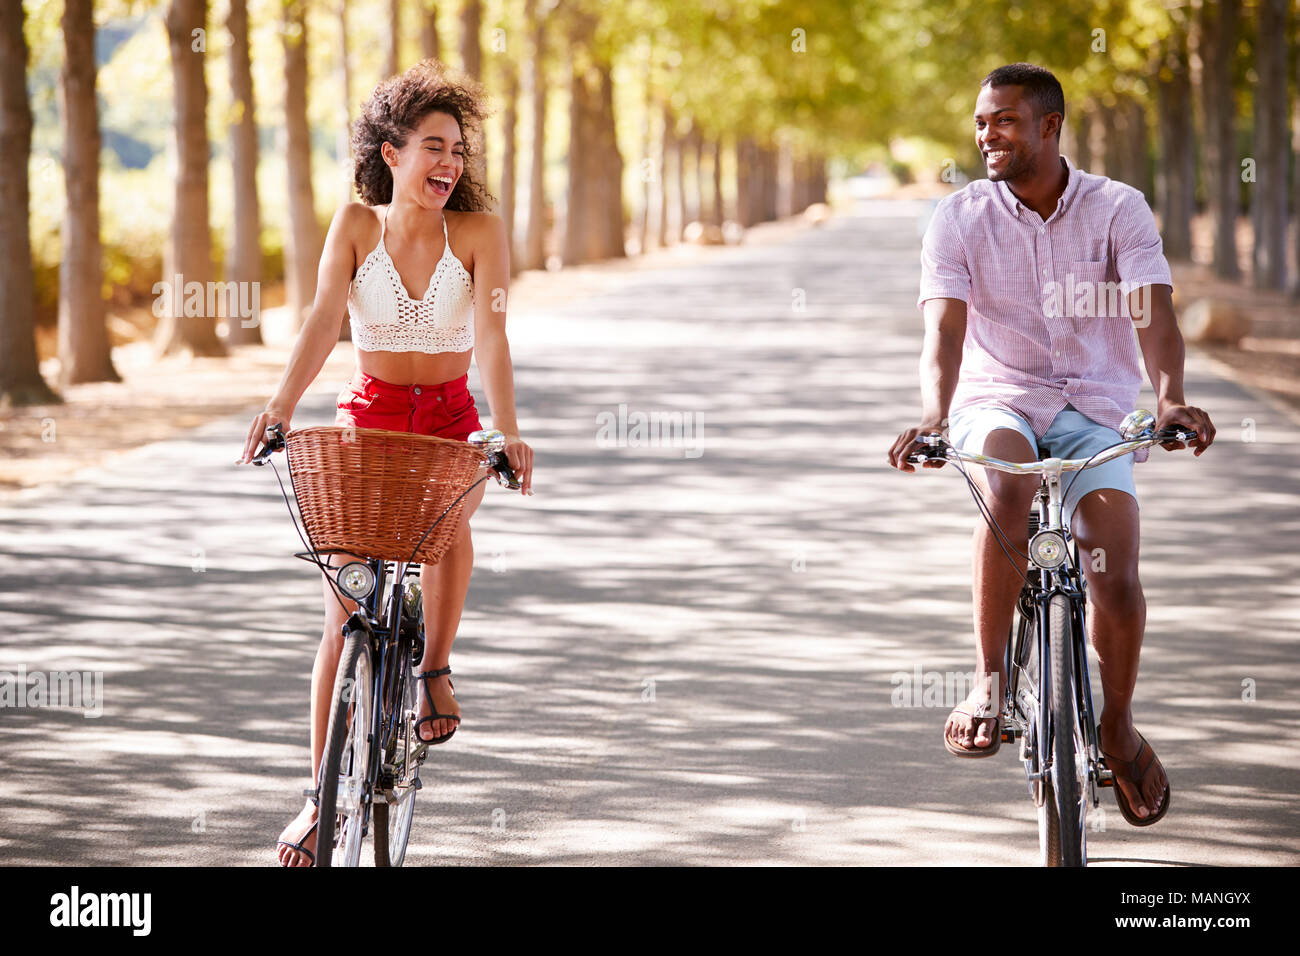 Laughing young couple riding bicycles on a sunny road Stock Photo